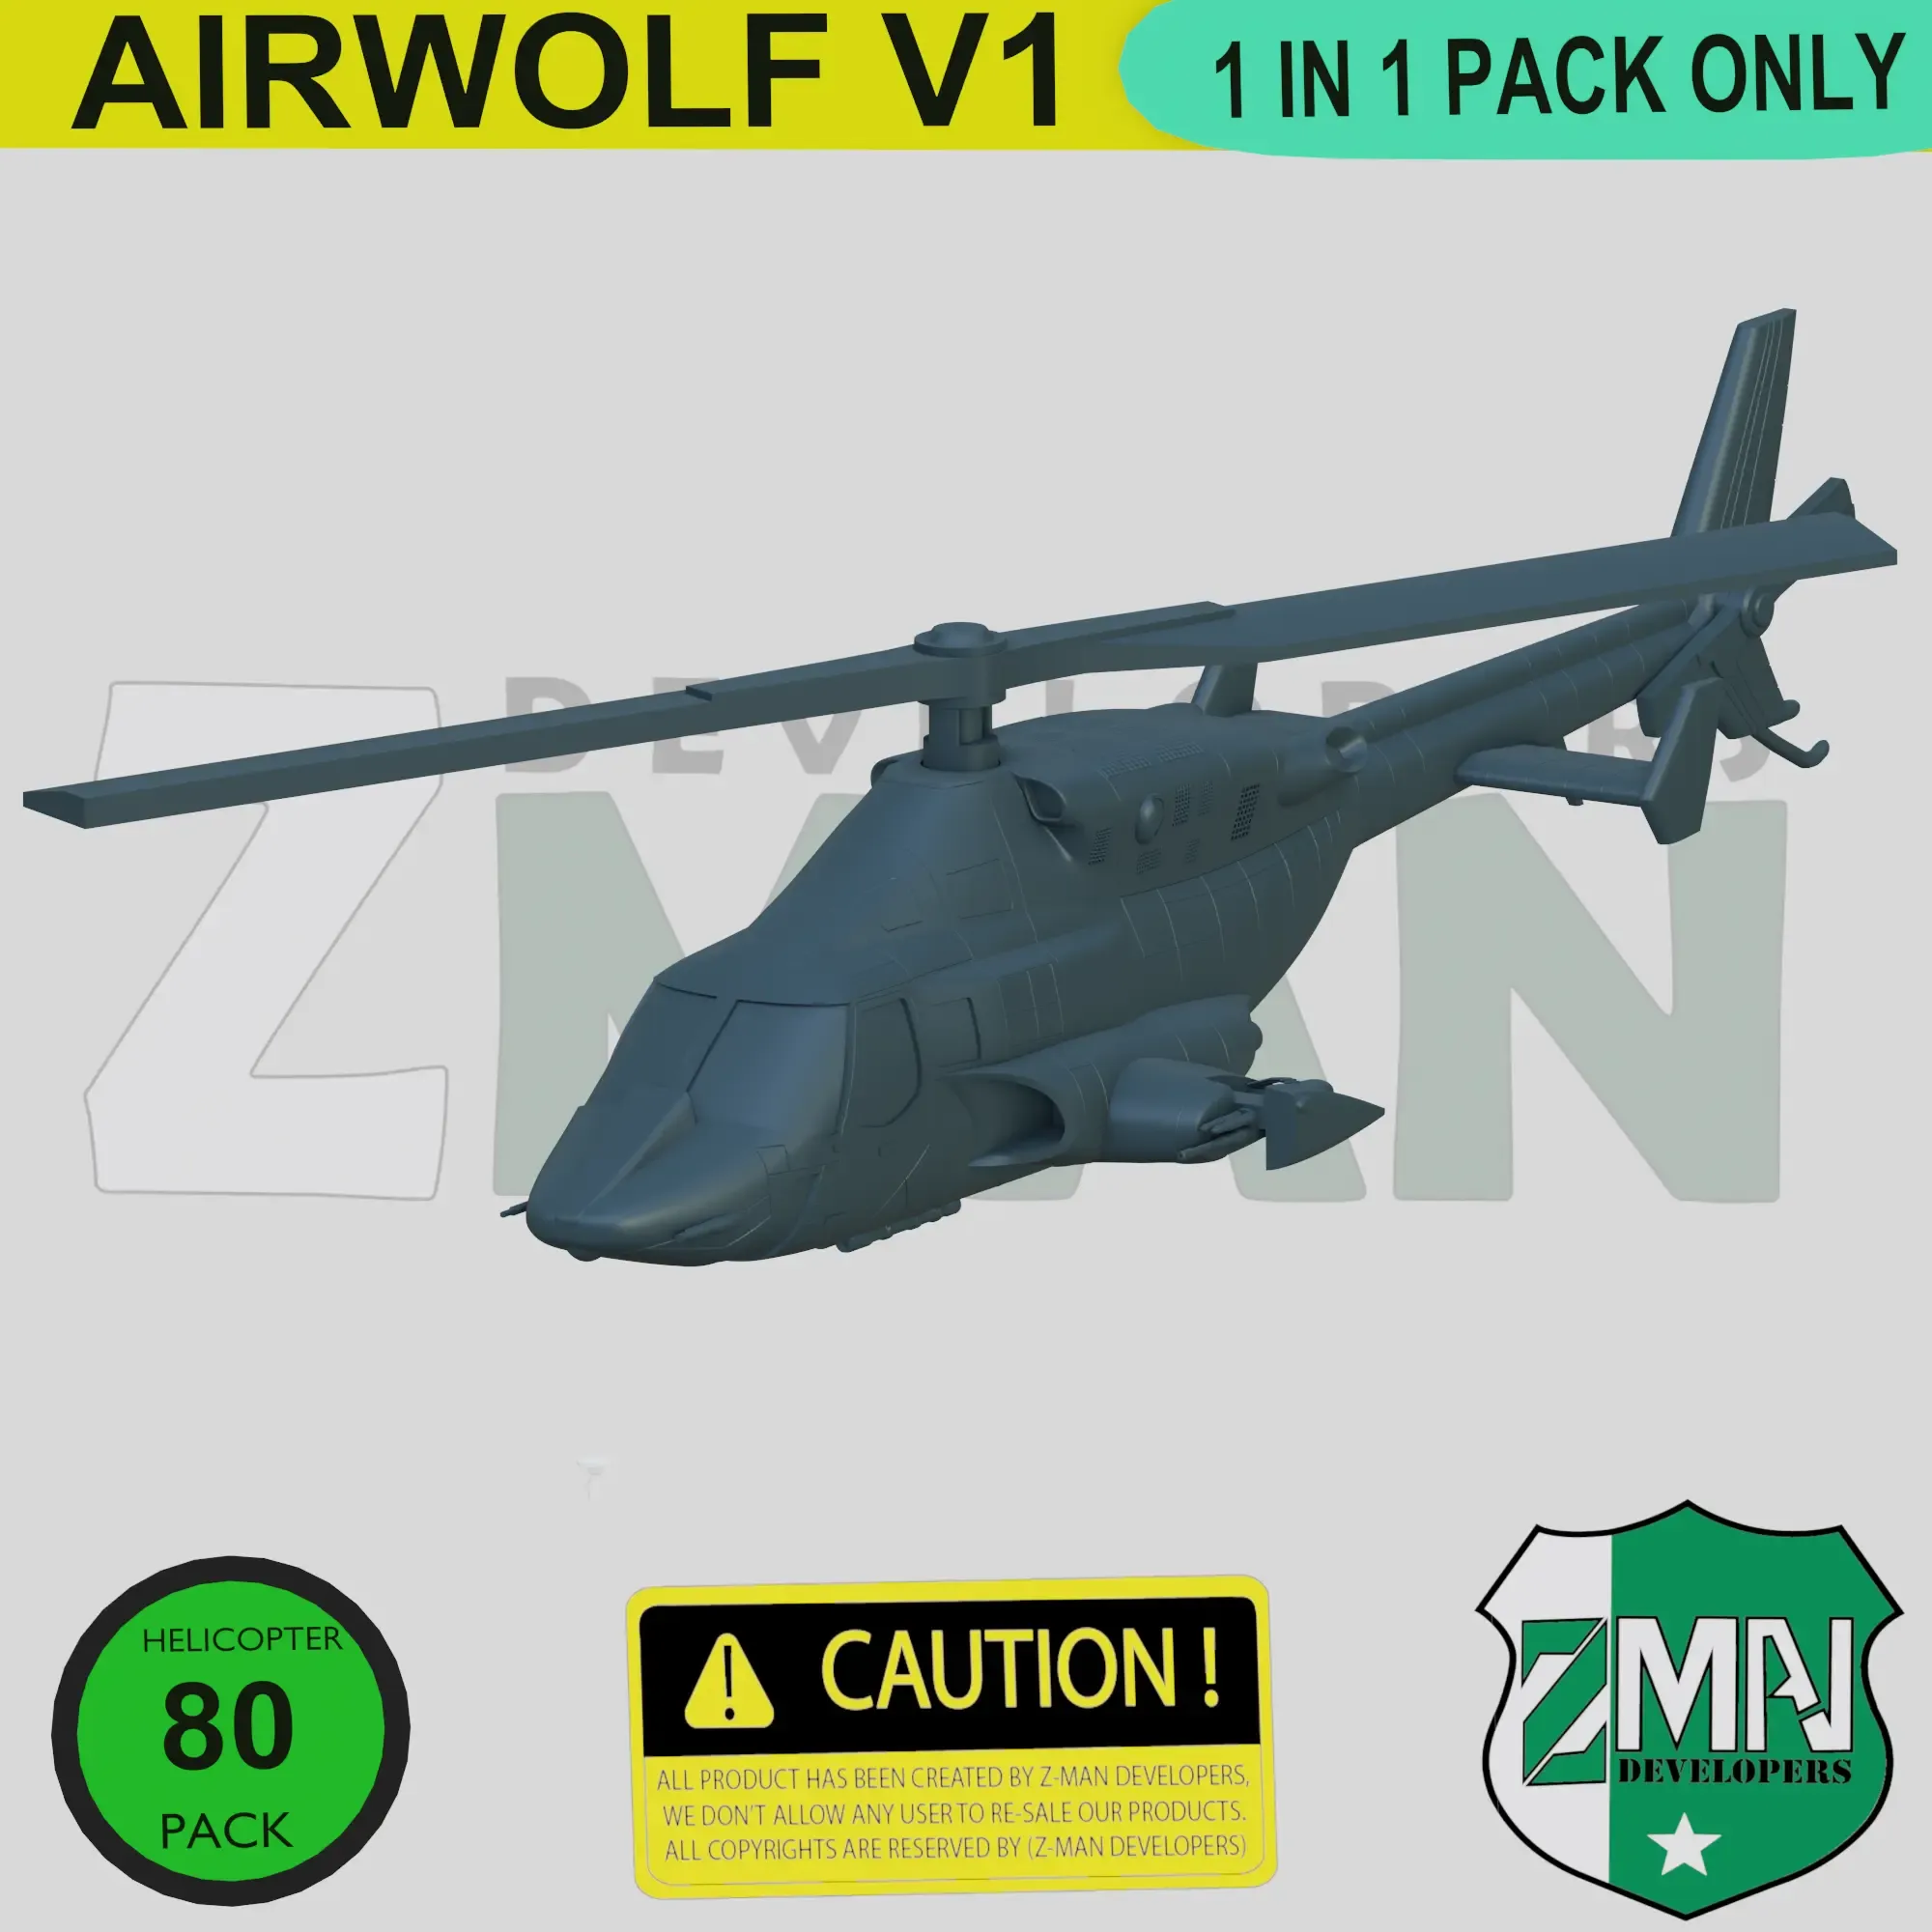 AIRWOLF HELICOPTER V2